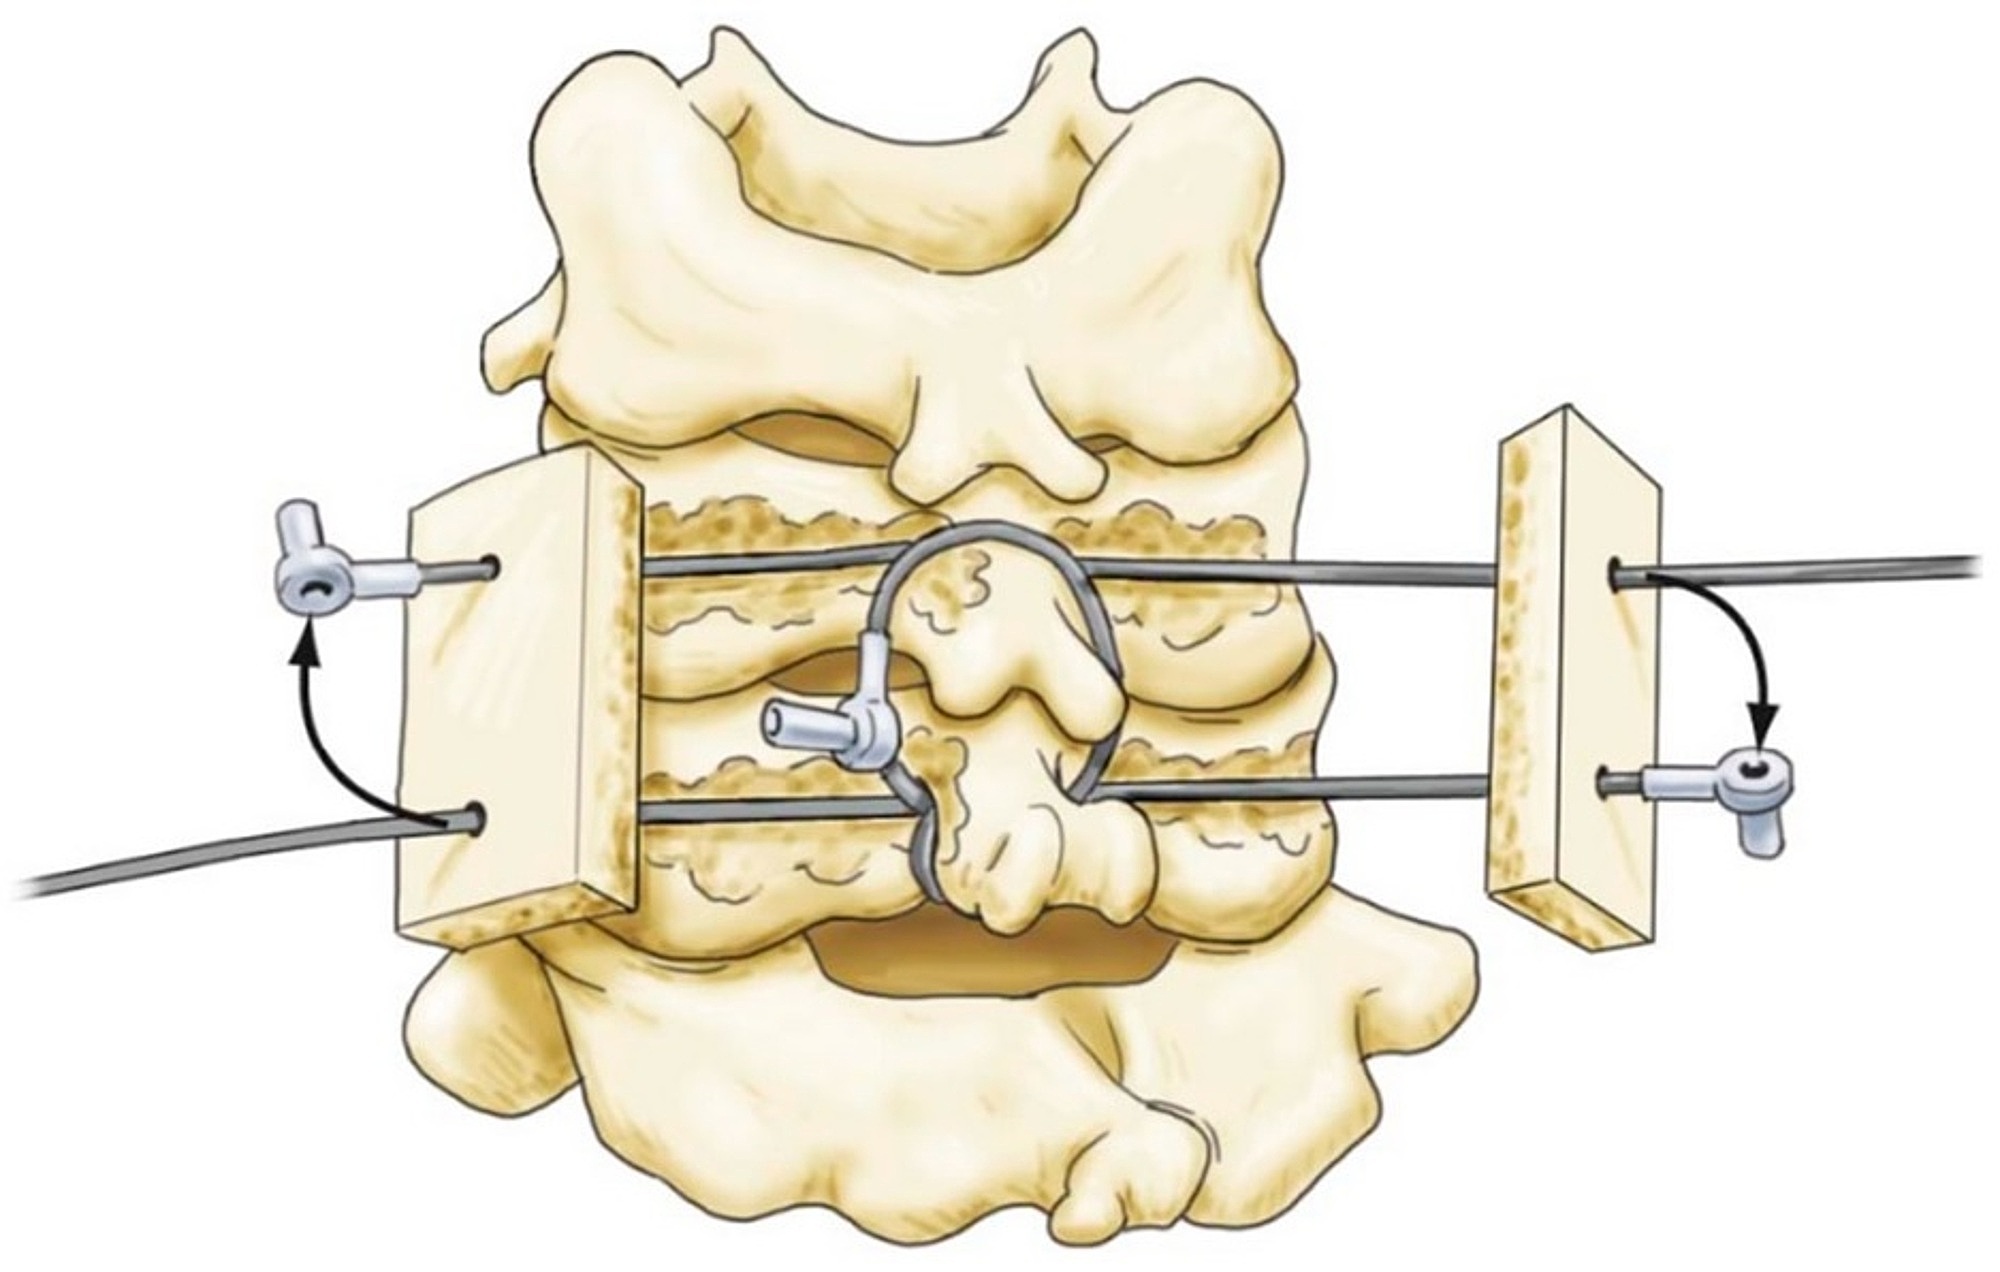 Cureus Posterior Fixation Techniques In The Subaxial Cervical Spine